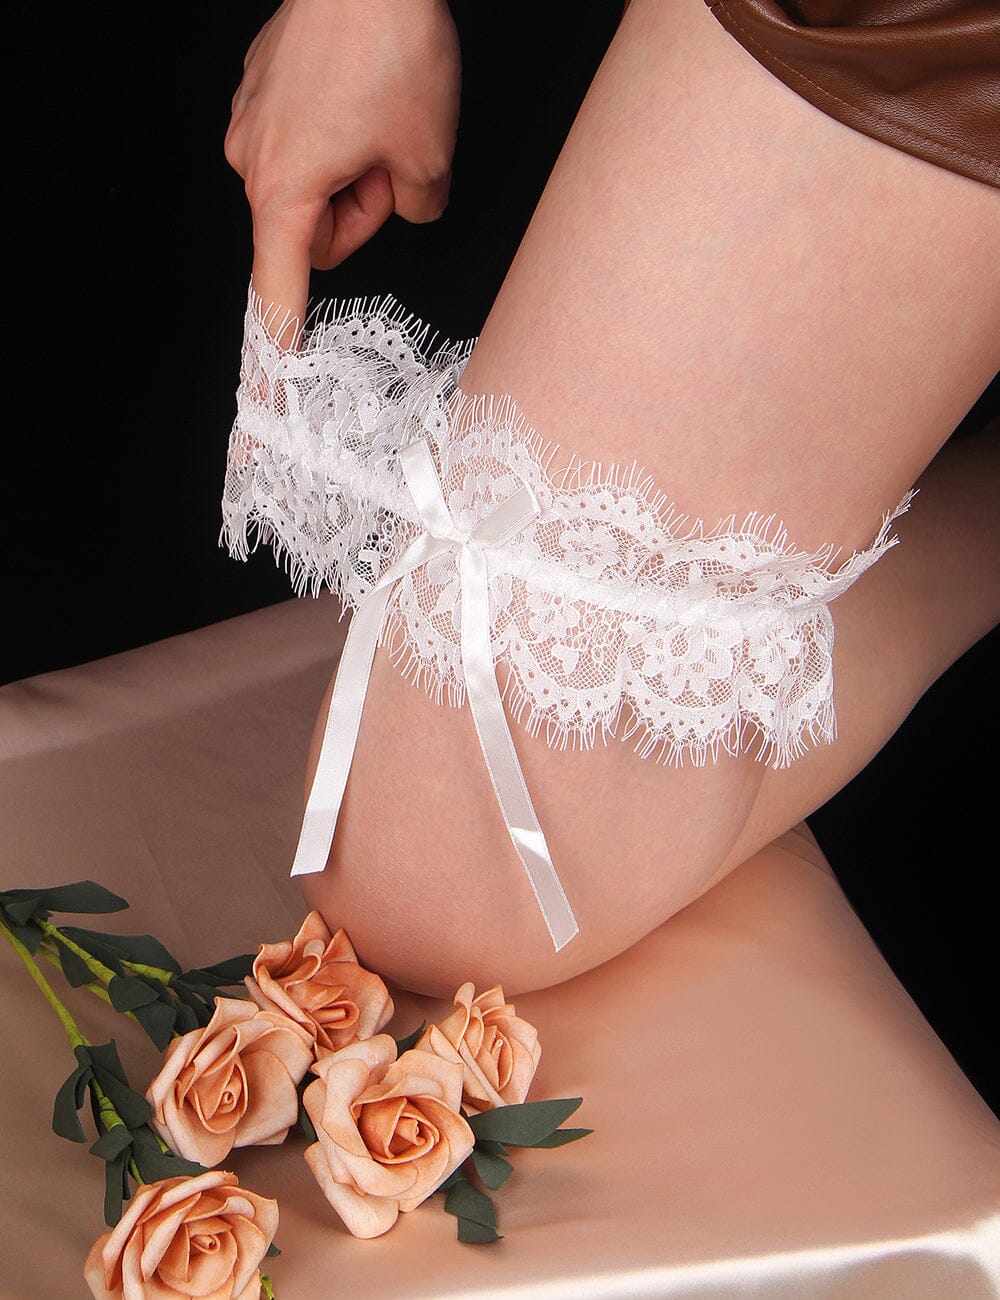 a close up of a person wearing a garter